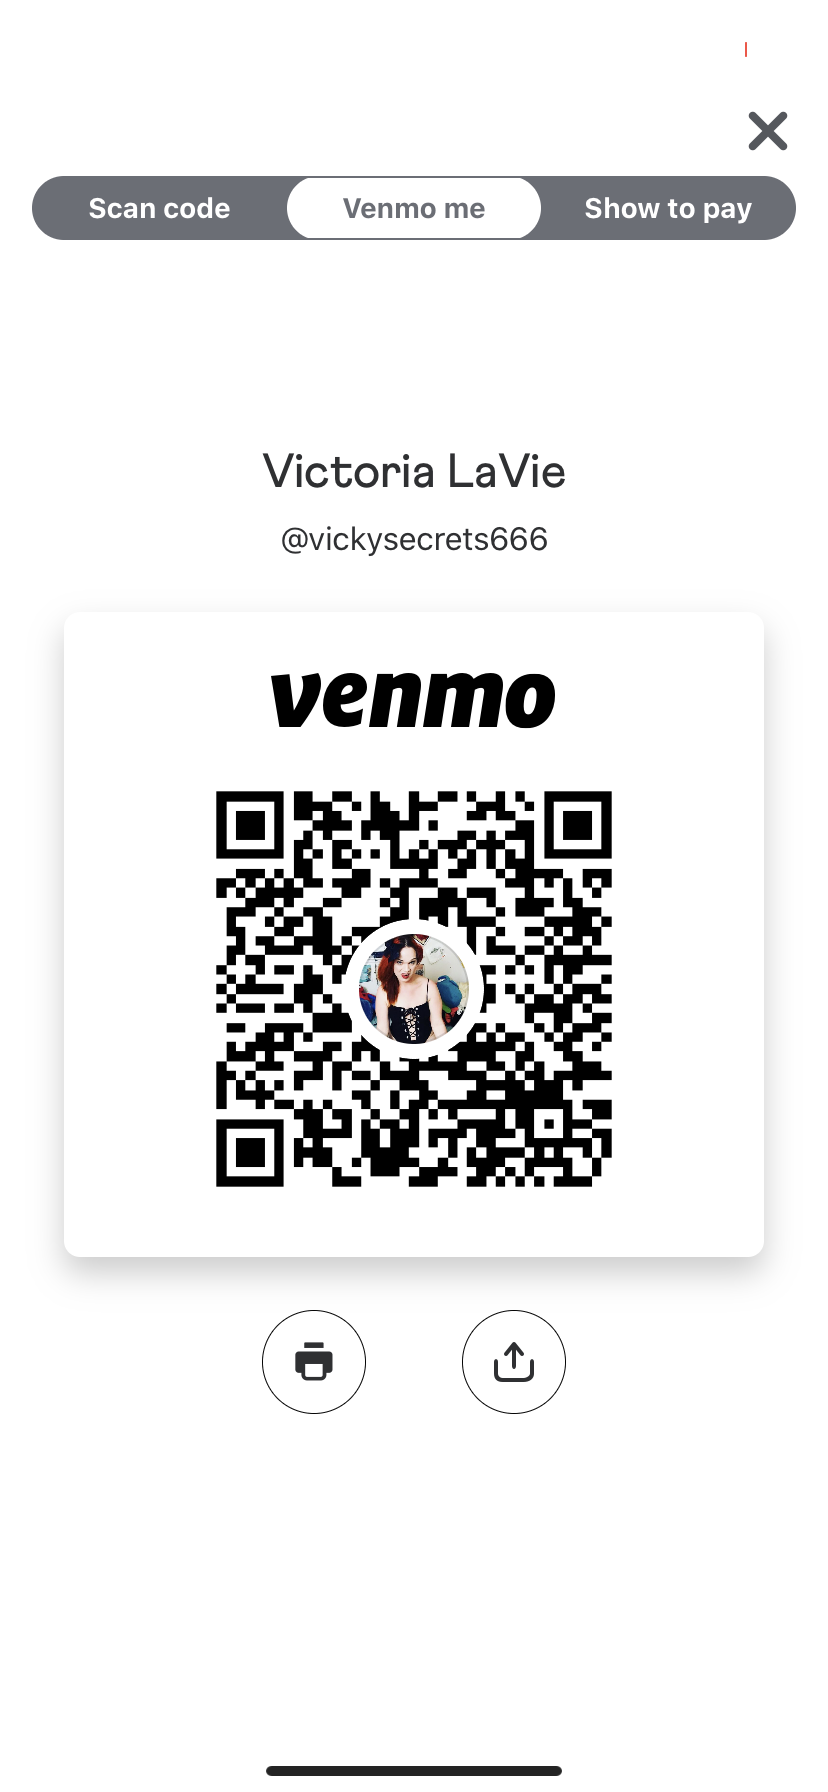 Photo by ✨?TS Victoria?✨ with the username @Tsvictoriaxoxo, who is a star user,  October 1, 2020 at 12:41 PM. The post is about the topic Skype sex cams and the text says '😋Skype with me $3 a min CashApp/Venmo 10 min minimum  💕live:.cid.72d6d1a3136d7dc0💕

📸Snapz SALE📸
$8/month
$30/yr
$80 lifetime

✨Panty Sale✨
$50 for 1 
$100 for 2

kik sexting:
$1 a min

kik/telegram@tsvictoriaxoxo'